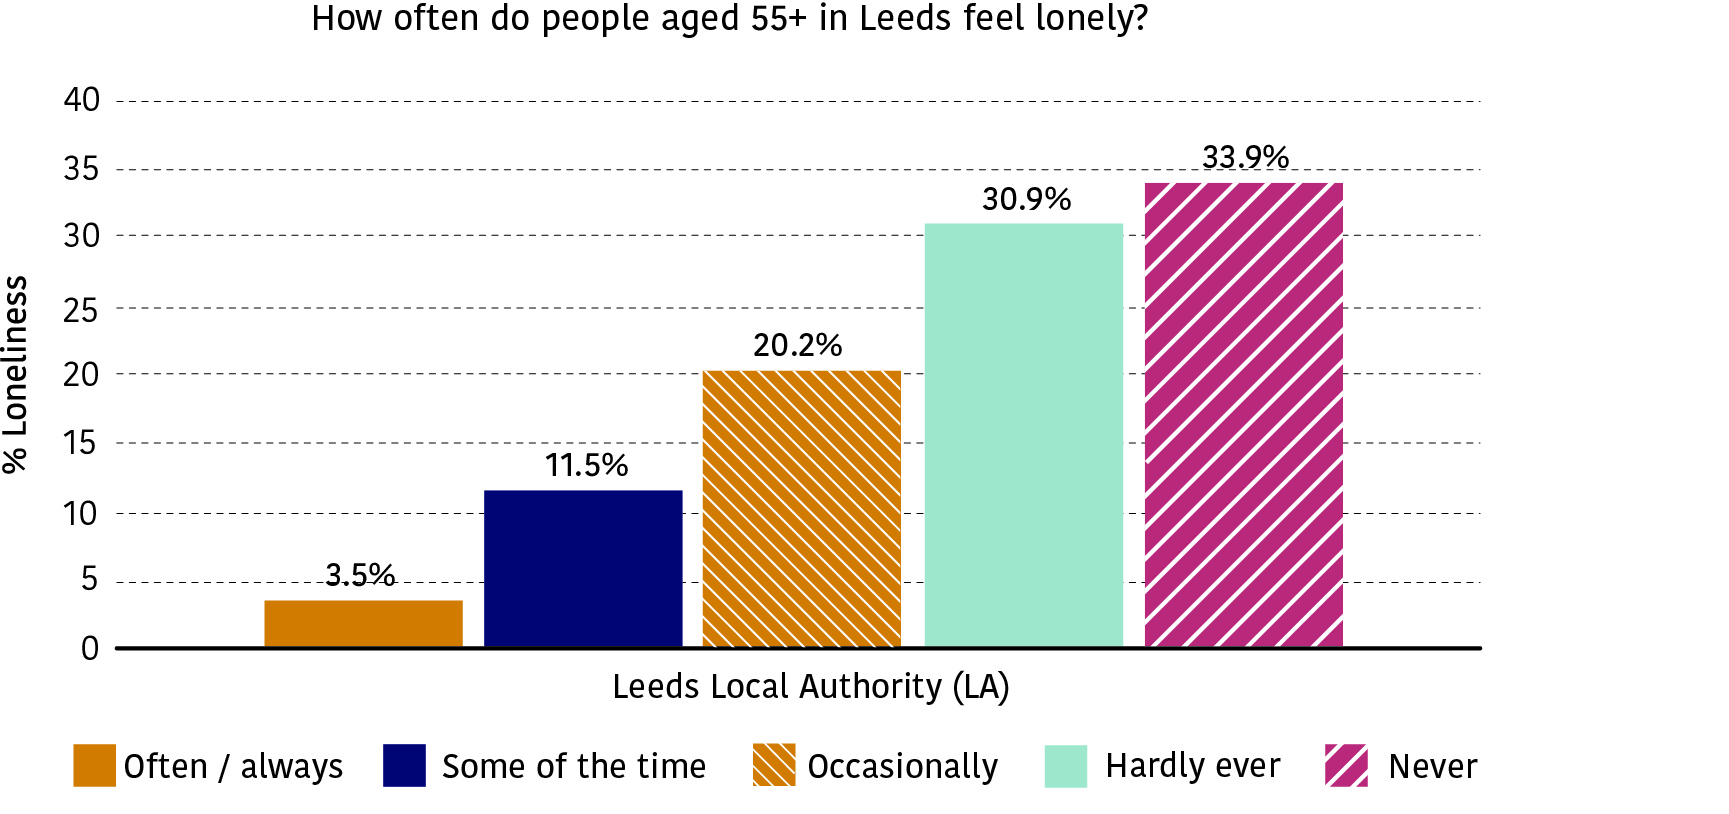 A bar chart showing the frequency of loneliness (3.5% reported often/always experiencing loneliness, 11.5% reported experiencing loneliness some of the time, 20.2% reported occasional loneliness, 30.9% reported hardly ever experiencing loneliness and 33.9% reported never experiencing loneliness).